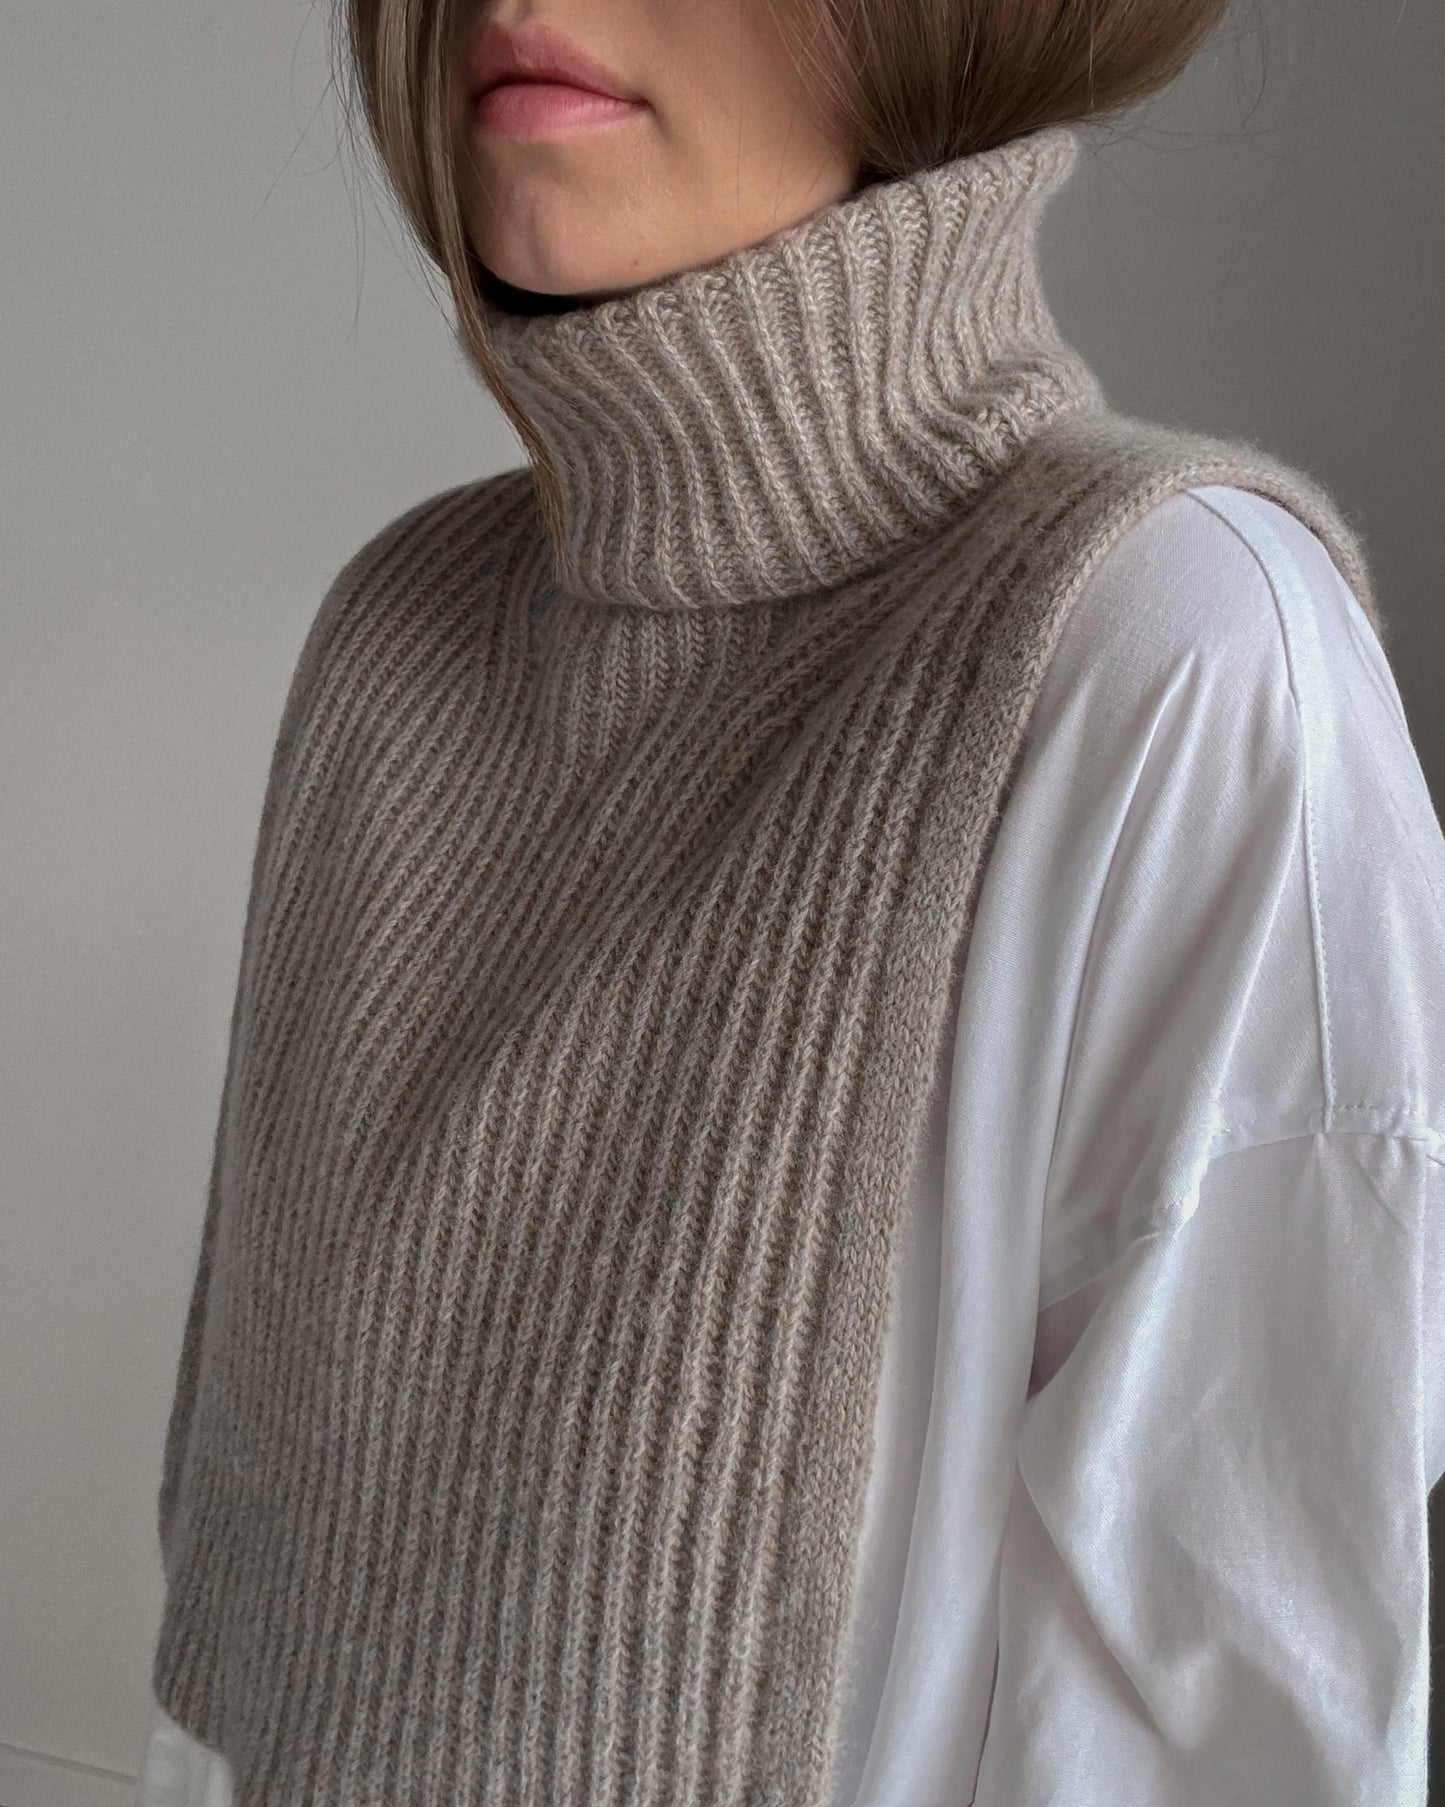 Knitting instructions for Bobbi Neck Warmer, a woolen and elegant accessory.